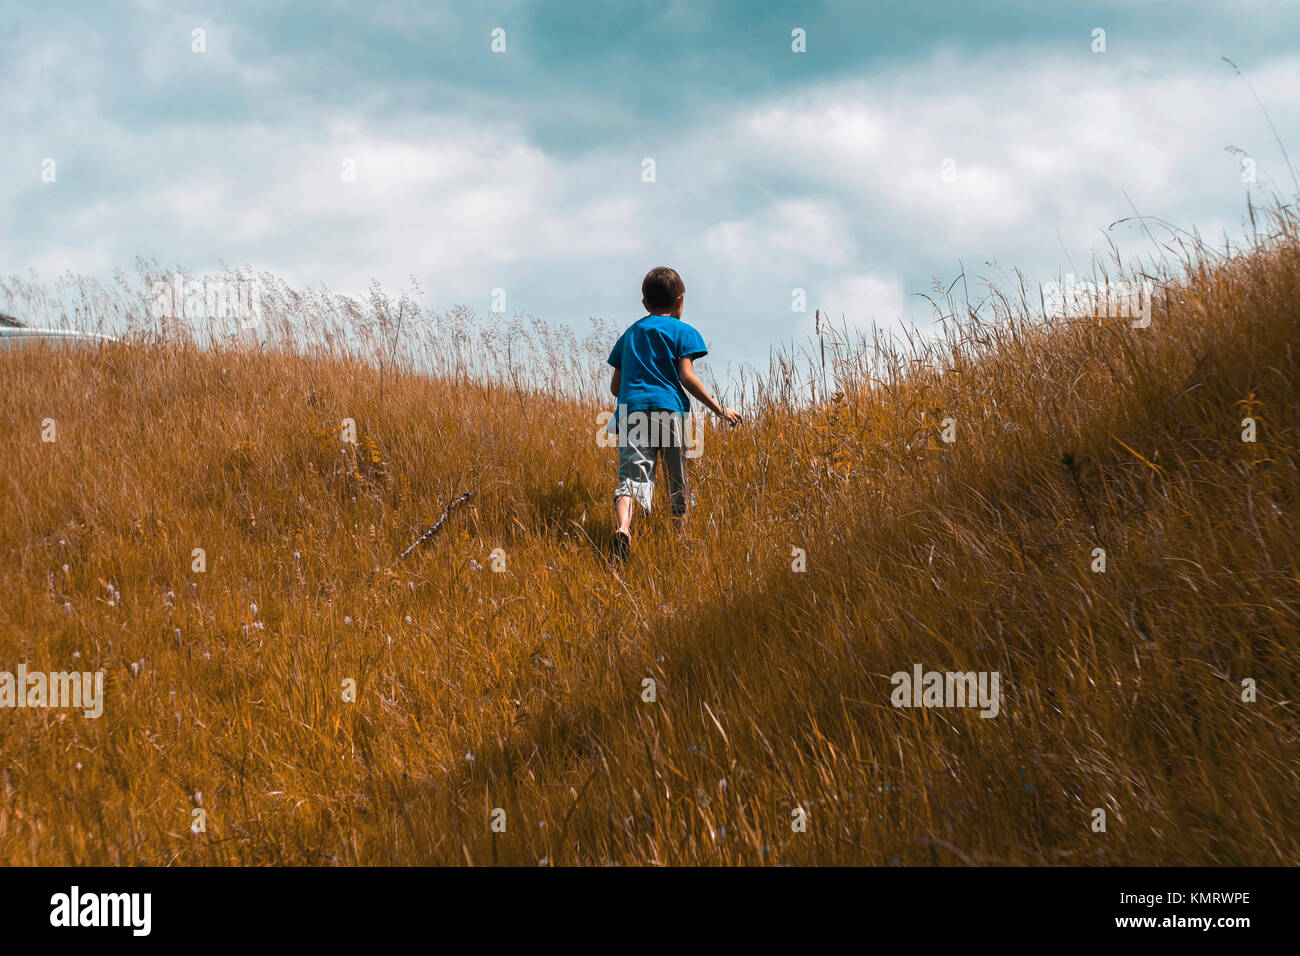 Rear view of boy climbing hill against cloudy sky Stock Photo